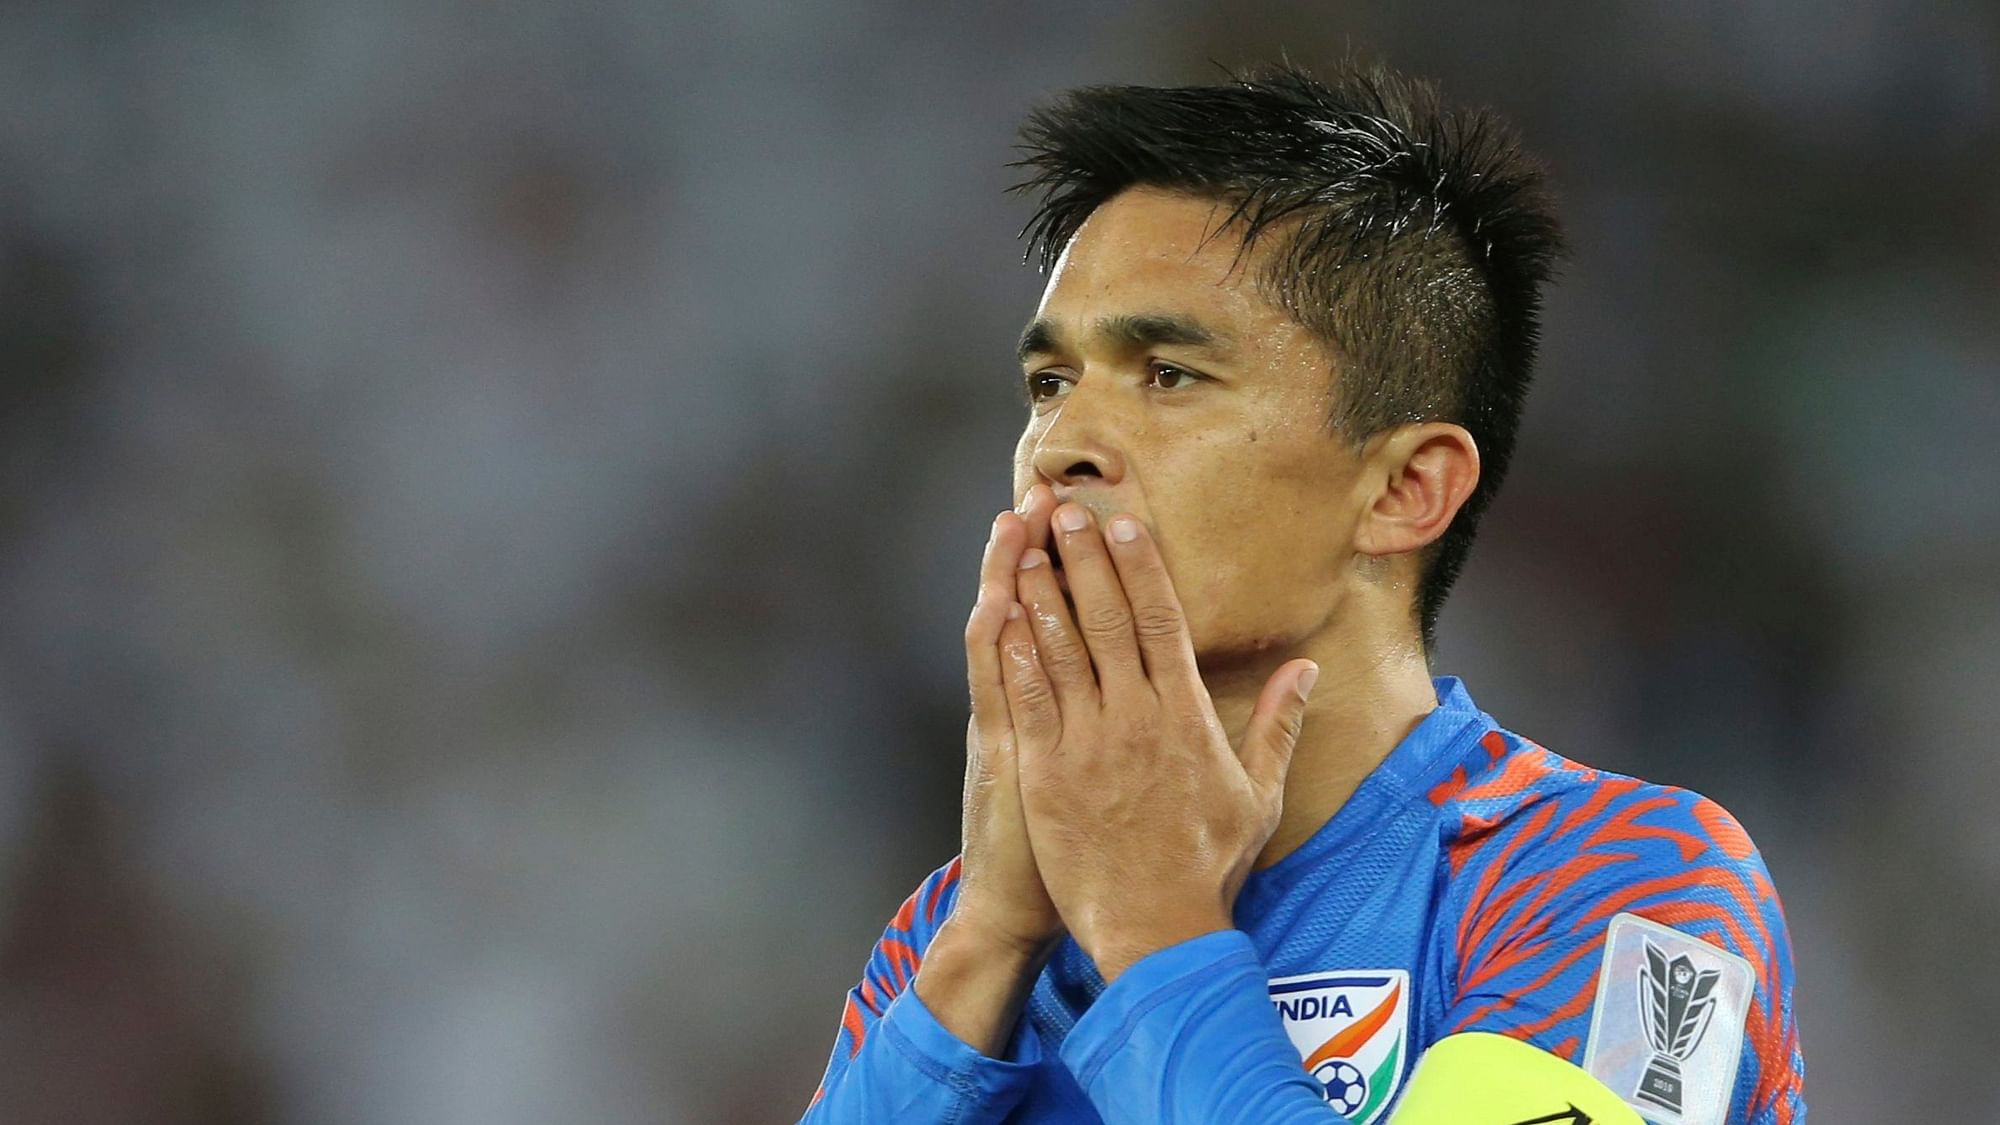 India lost 1-0 to Bahrain in their last group stage match of the AFC Asian Cup and have been knocked out.&nbsp;